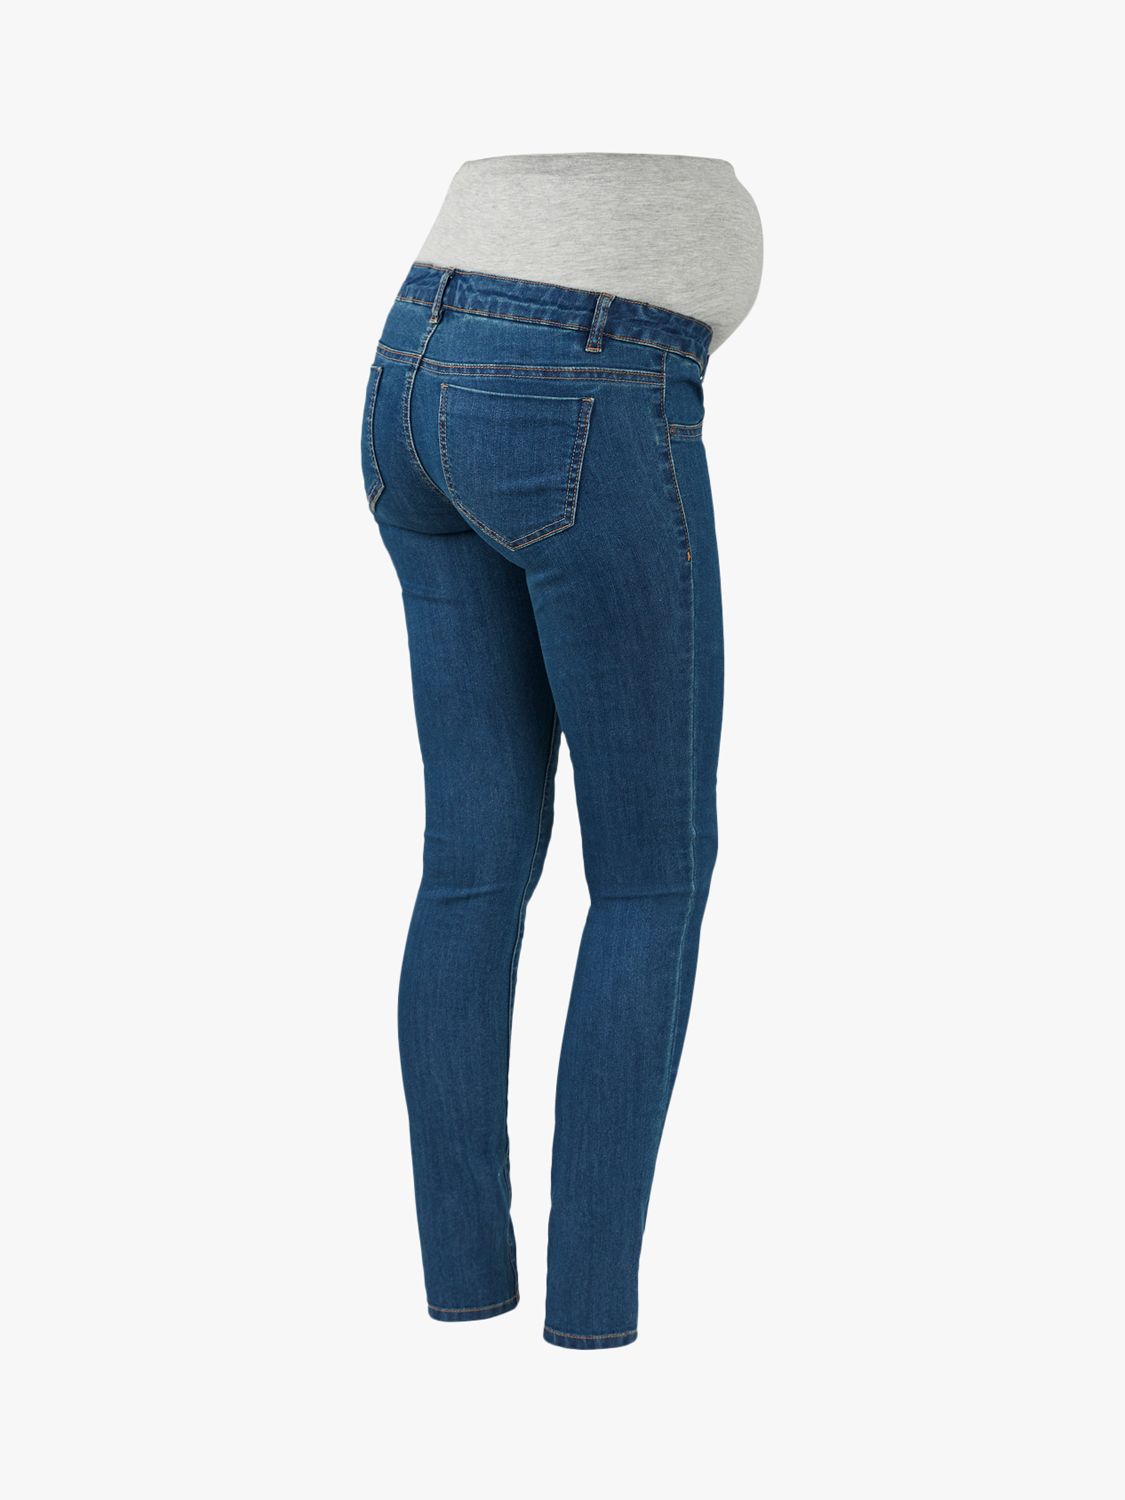 Buy Mamalicious Julia Slim Fit Maternity Jeans, Blue Online at johnlewis.com